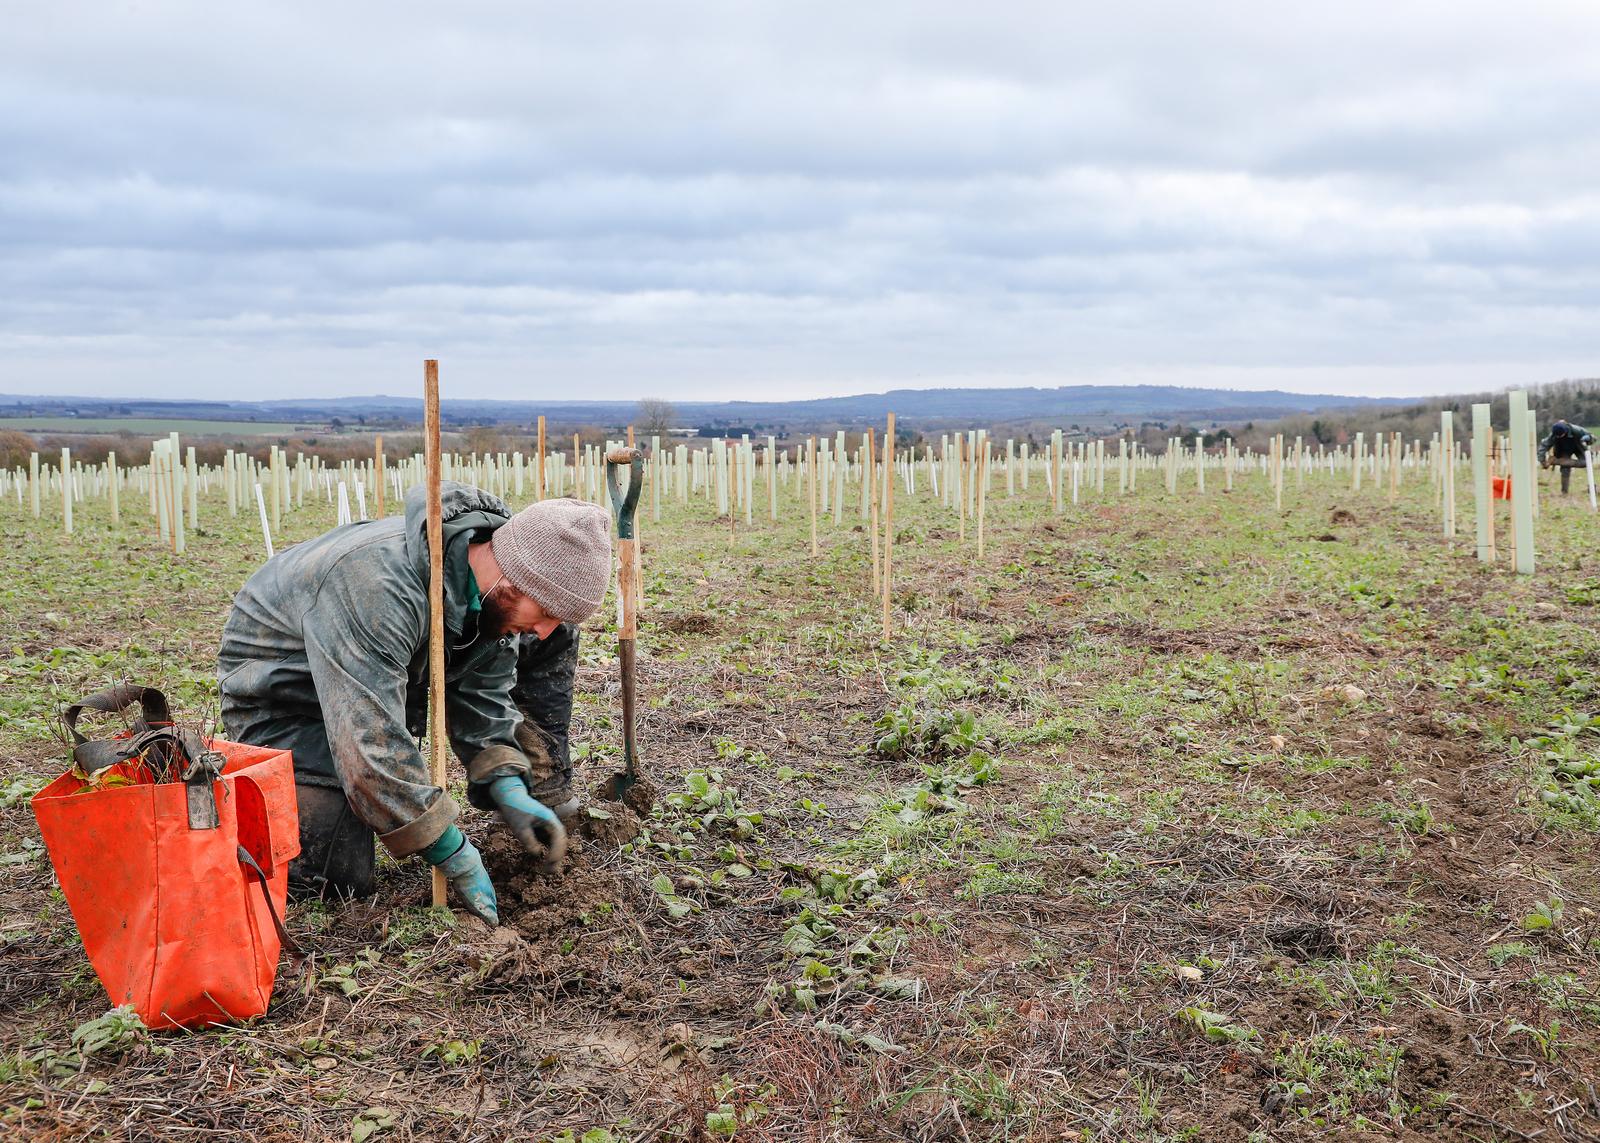 A member of our forestry team kneeling planting a tree sapling in field filled with new trees protected by plastic guards